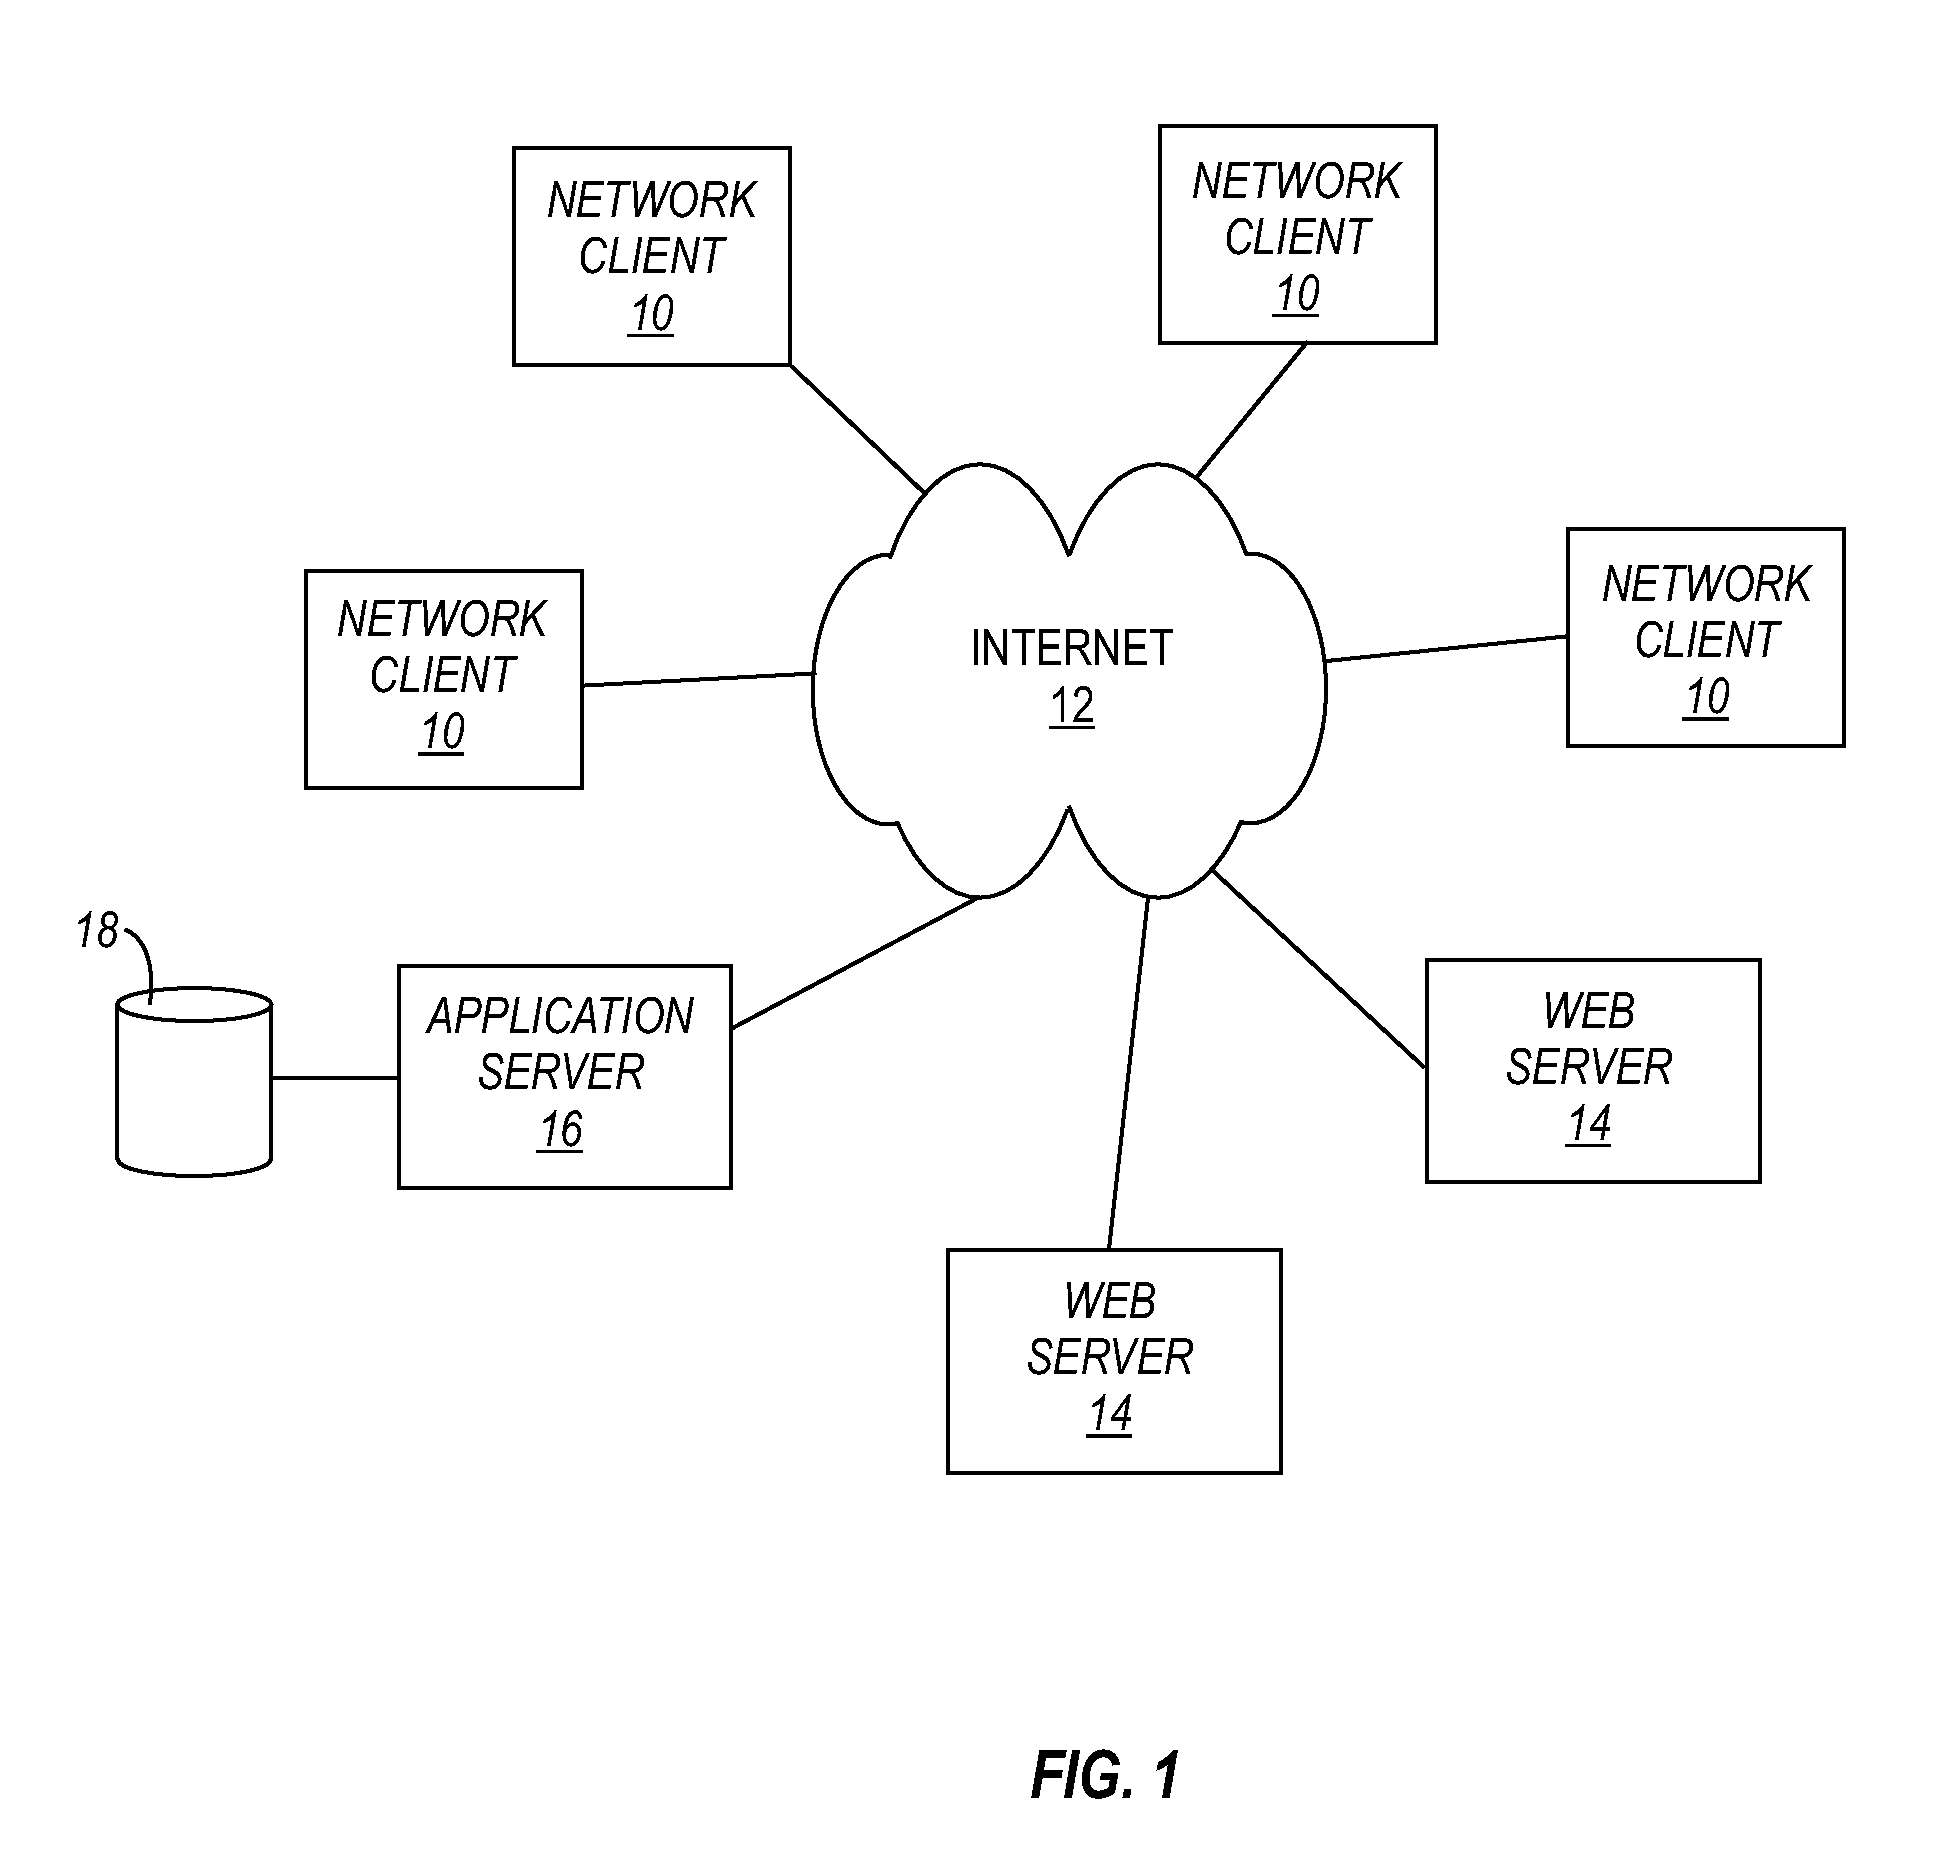 Method for displaying user generated content in a web browser